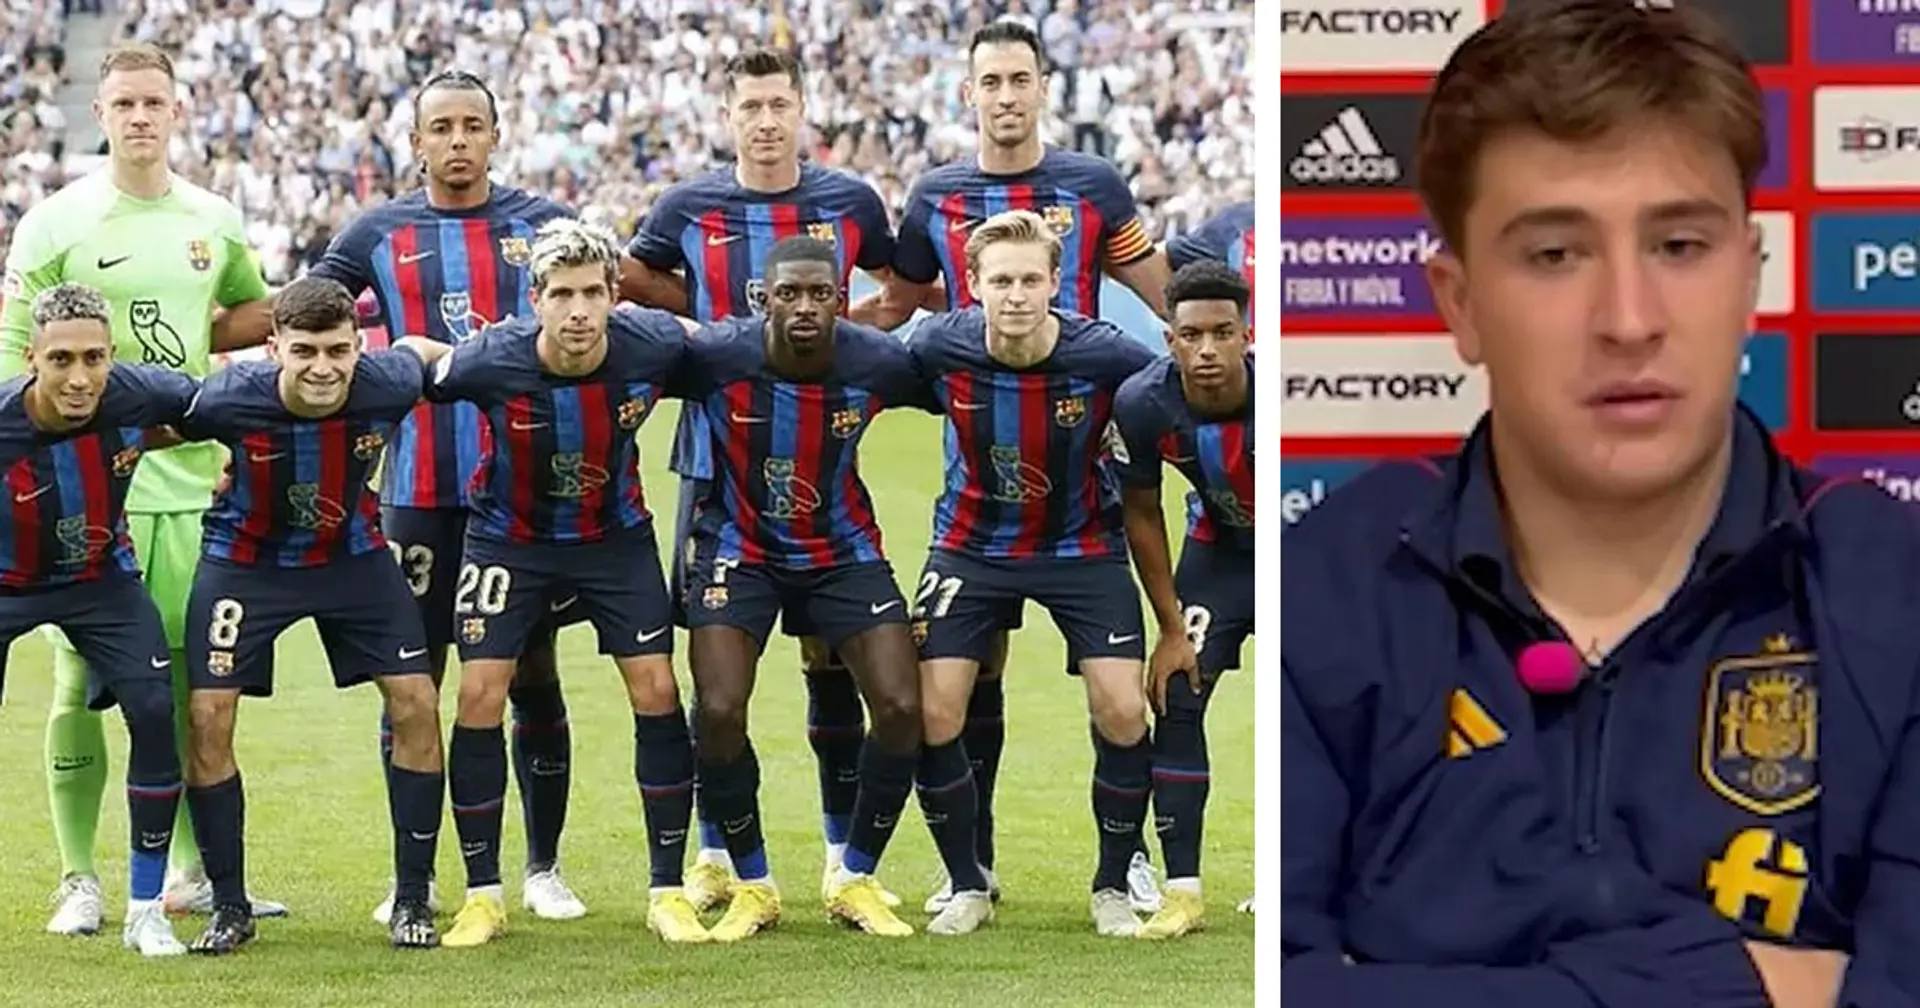 Pablo Torre wants Barca stay 'to learn from the best' - names 3 players he's impressed by the most